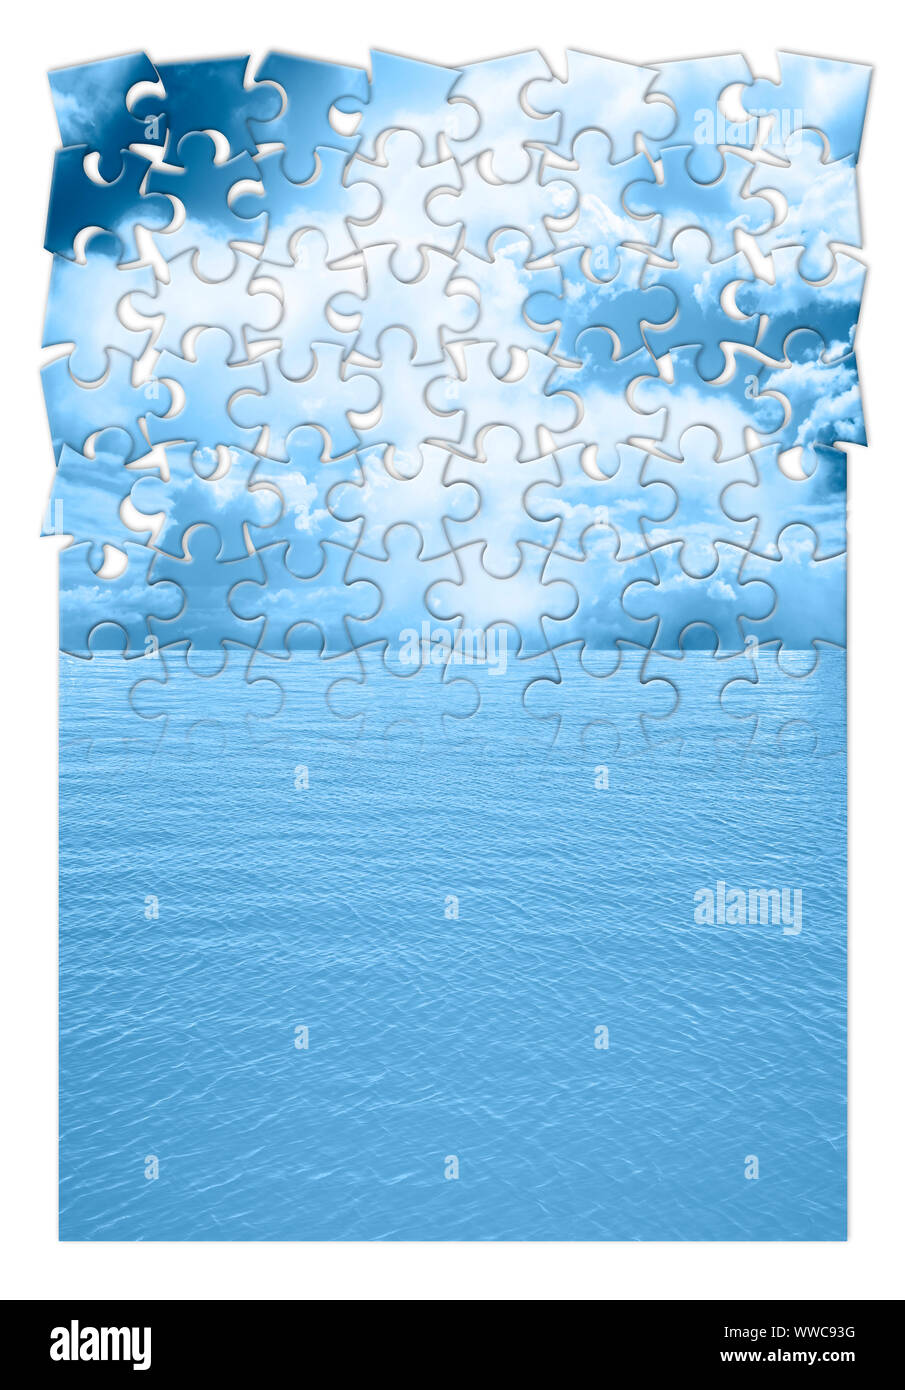 Calm sea with cloudy sky - concept image in jigsaw puzzle shape Stock Photo